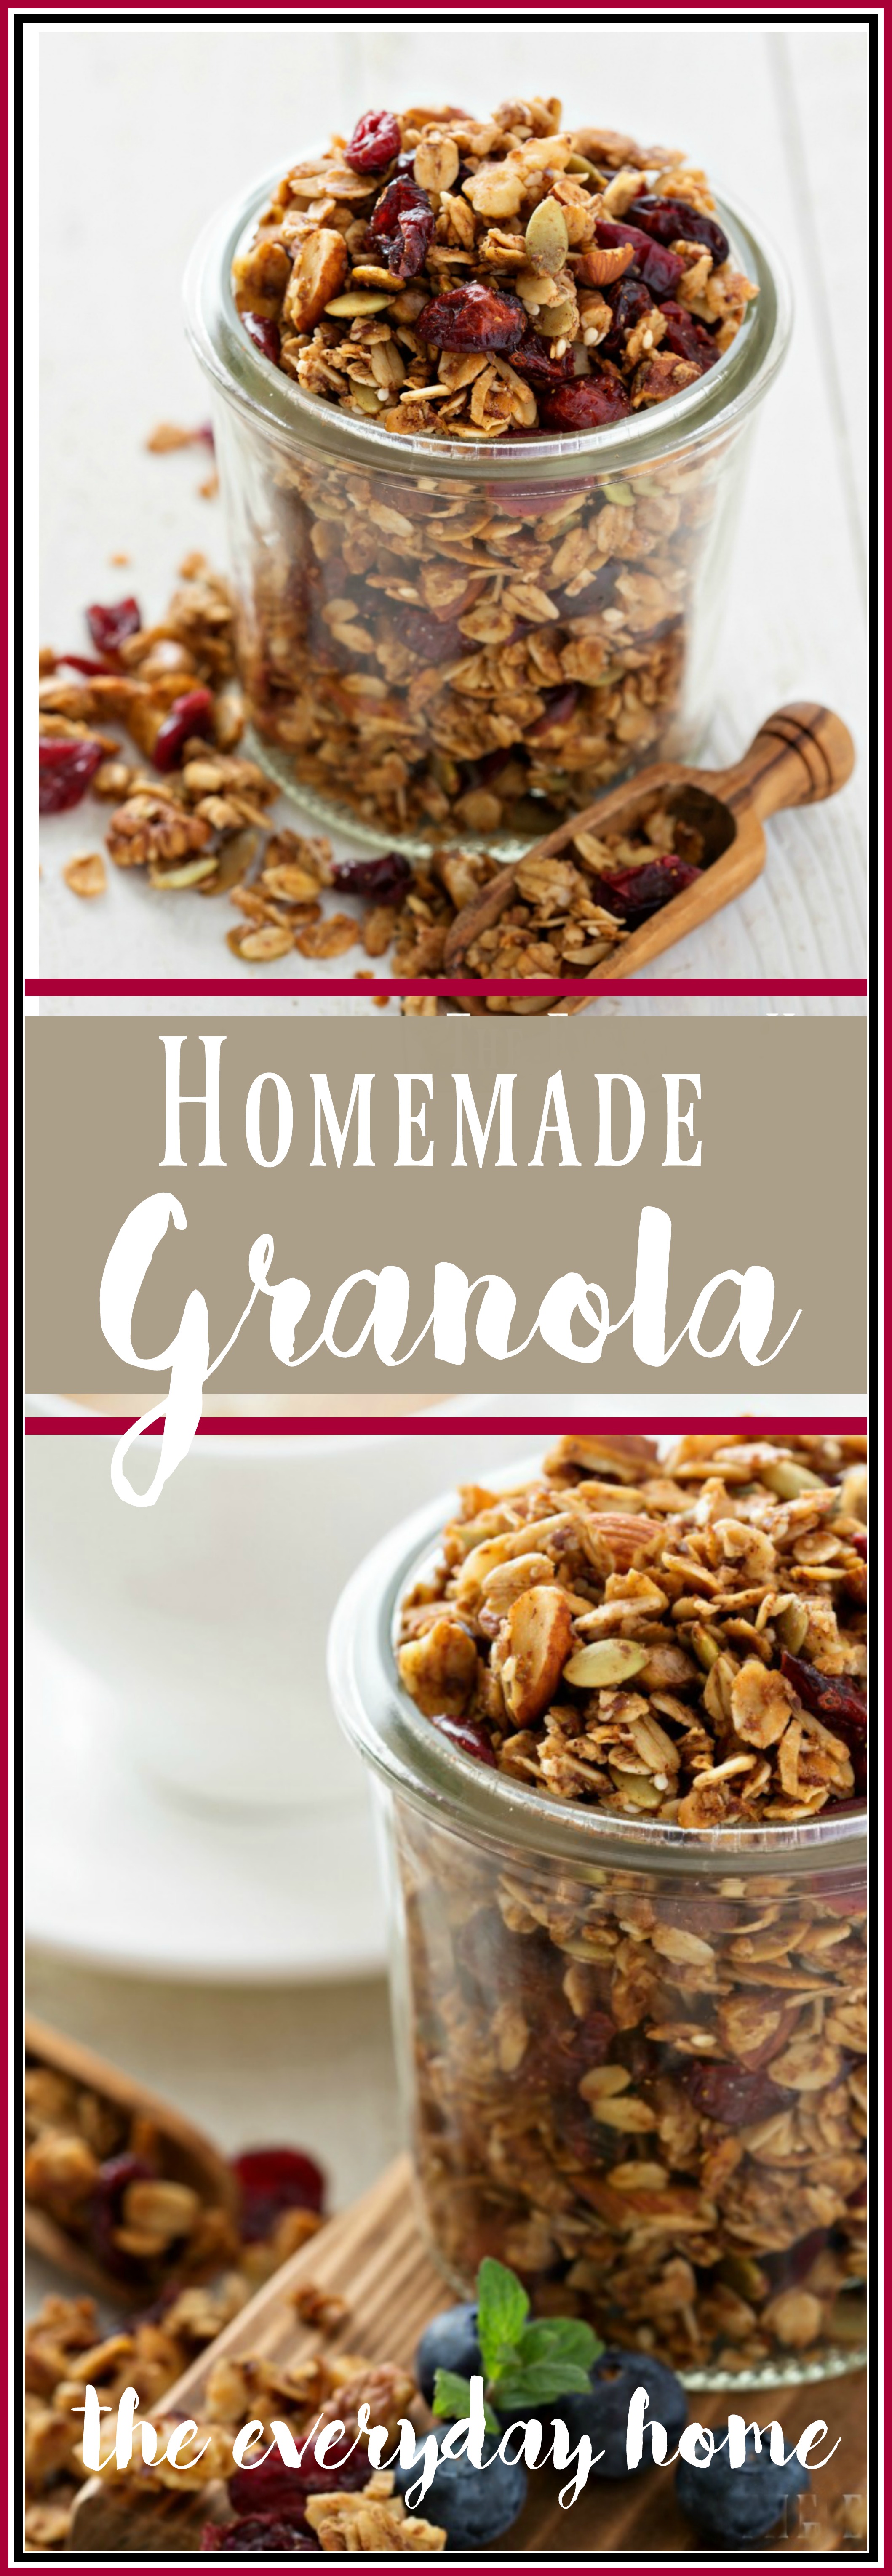 easy-homemade-granola-with-cranberries-and-nuts | The Everyday Home | www.everydayhomeblog.com